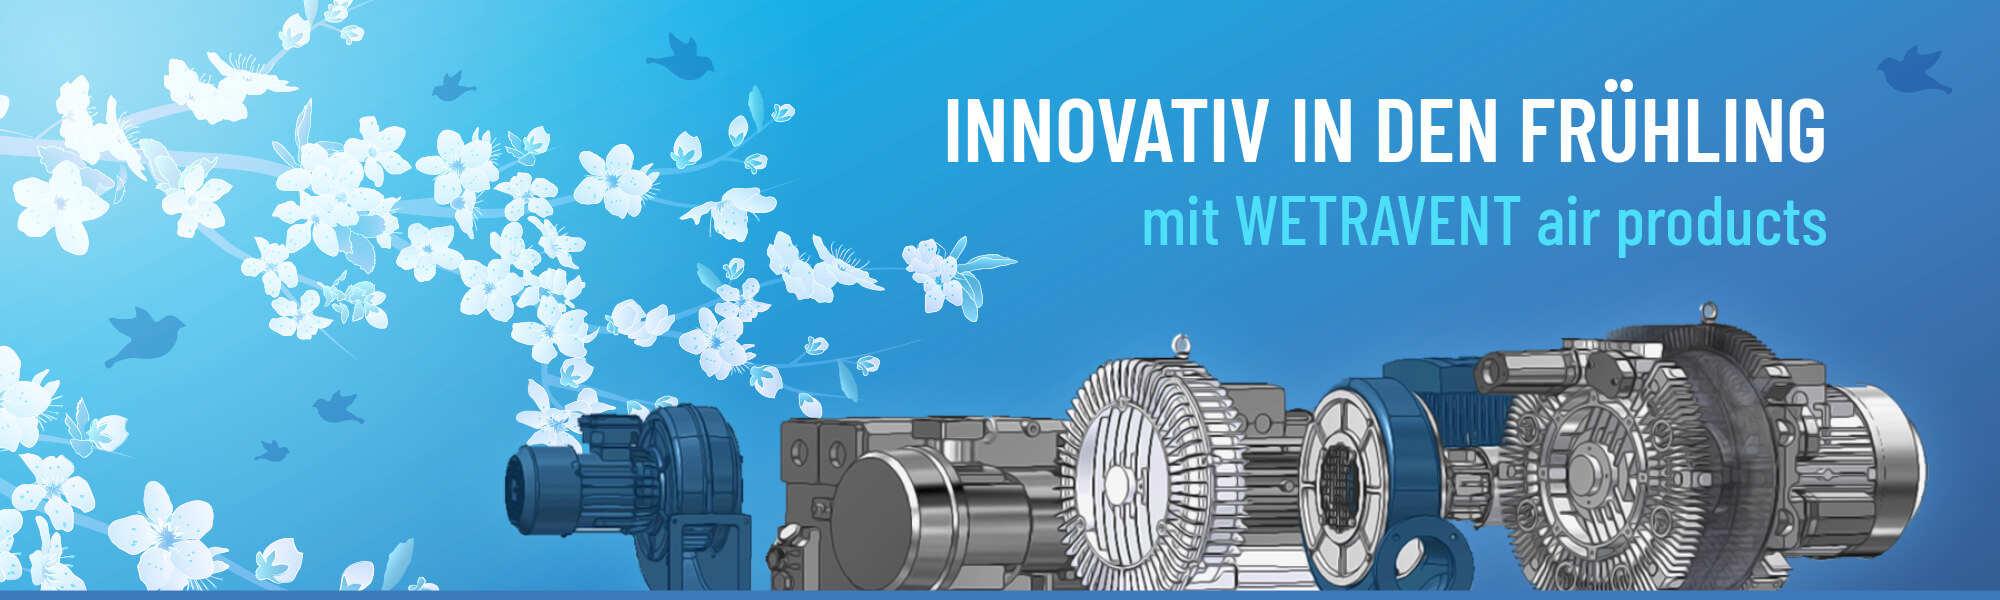 WETRAVENT Air Products - Innovativ in den Frühling